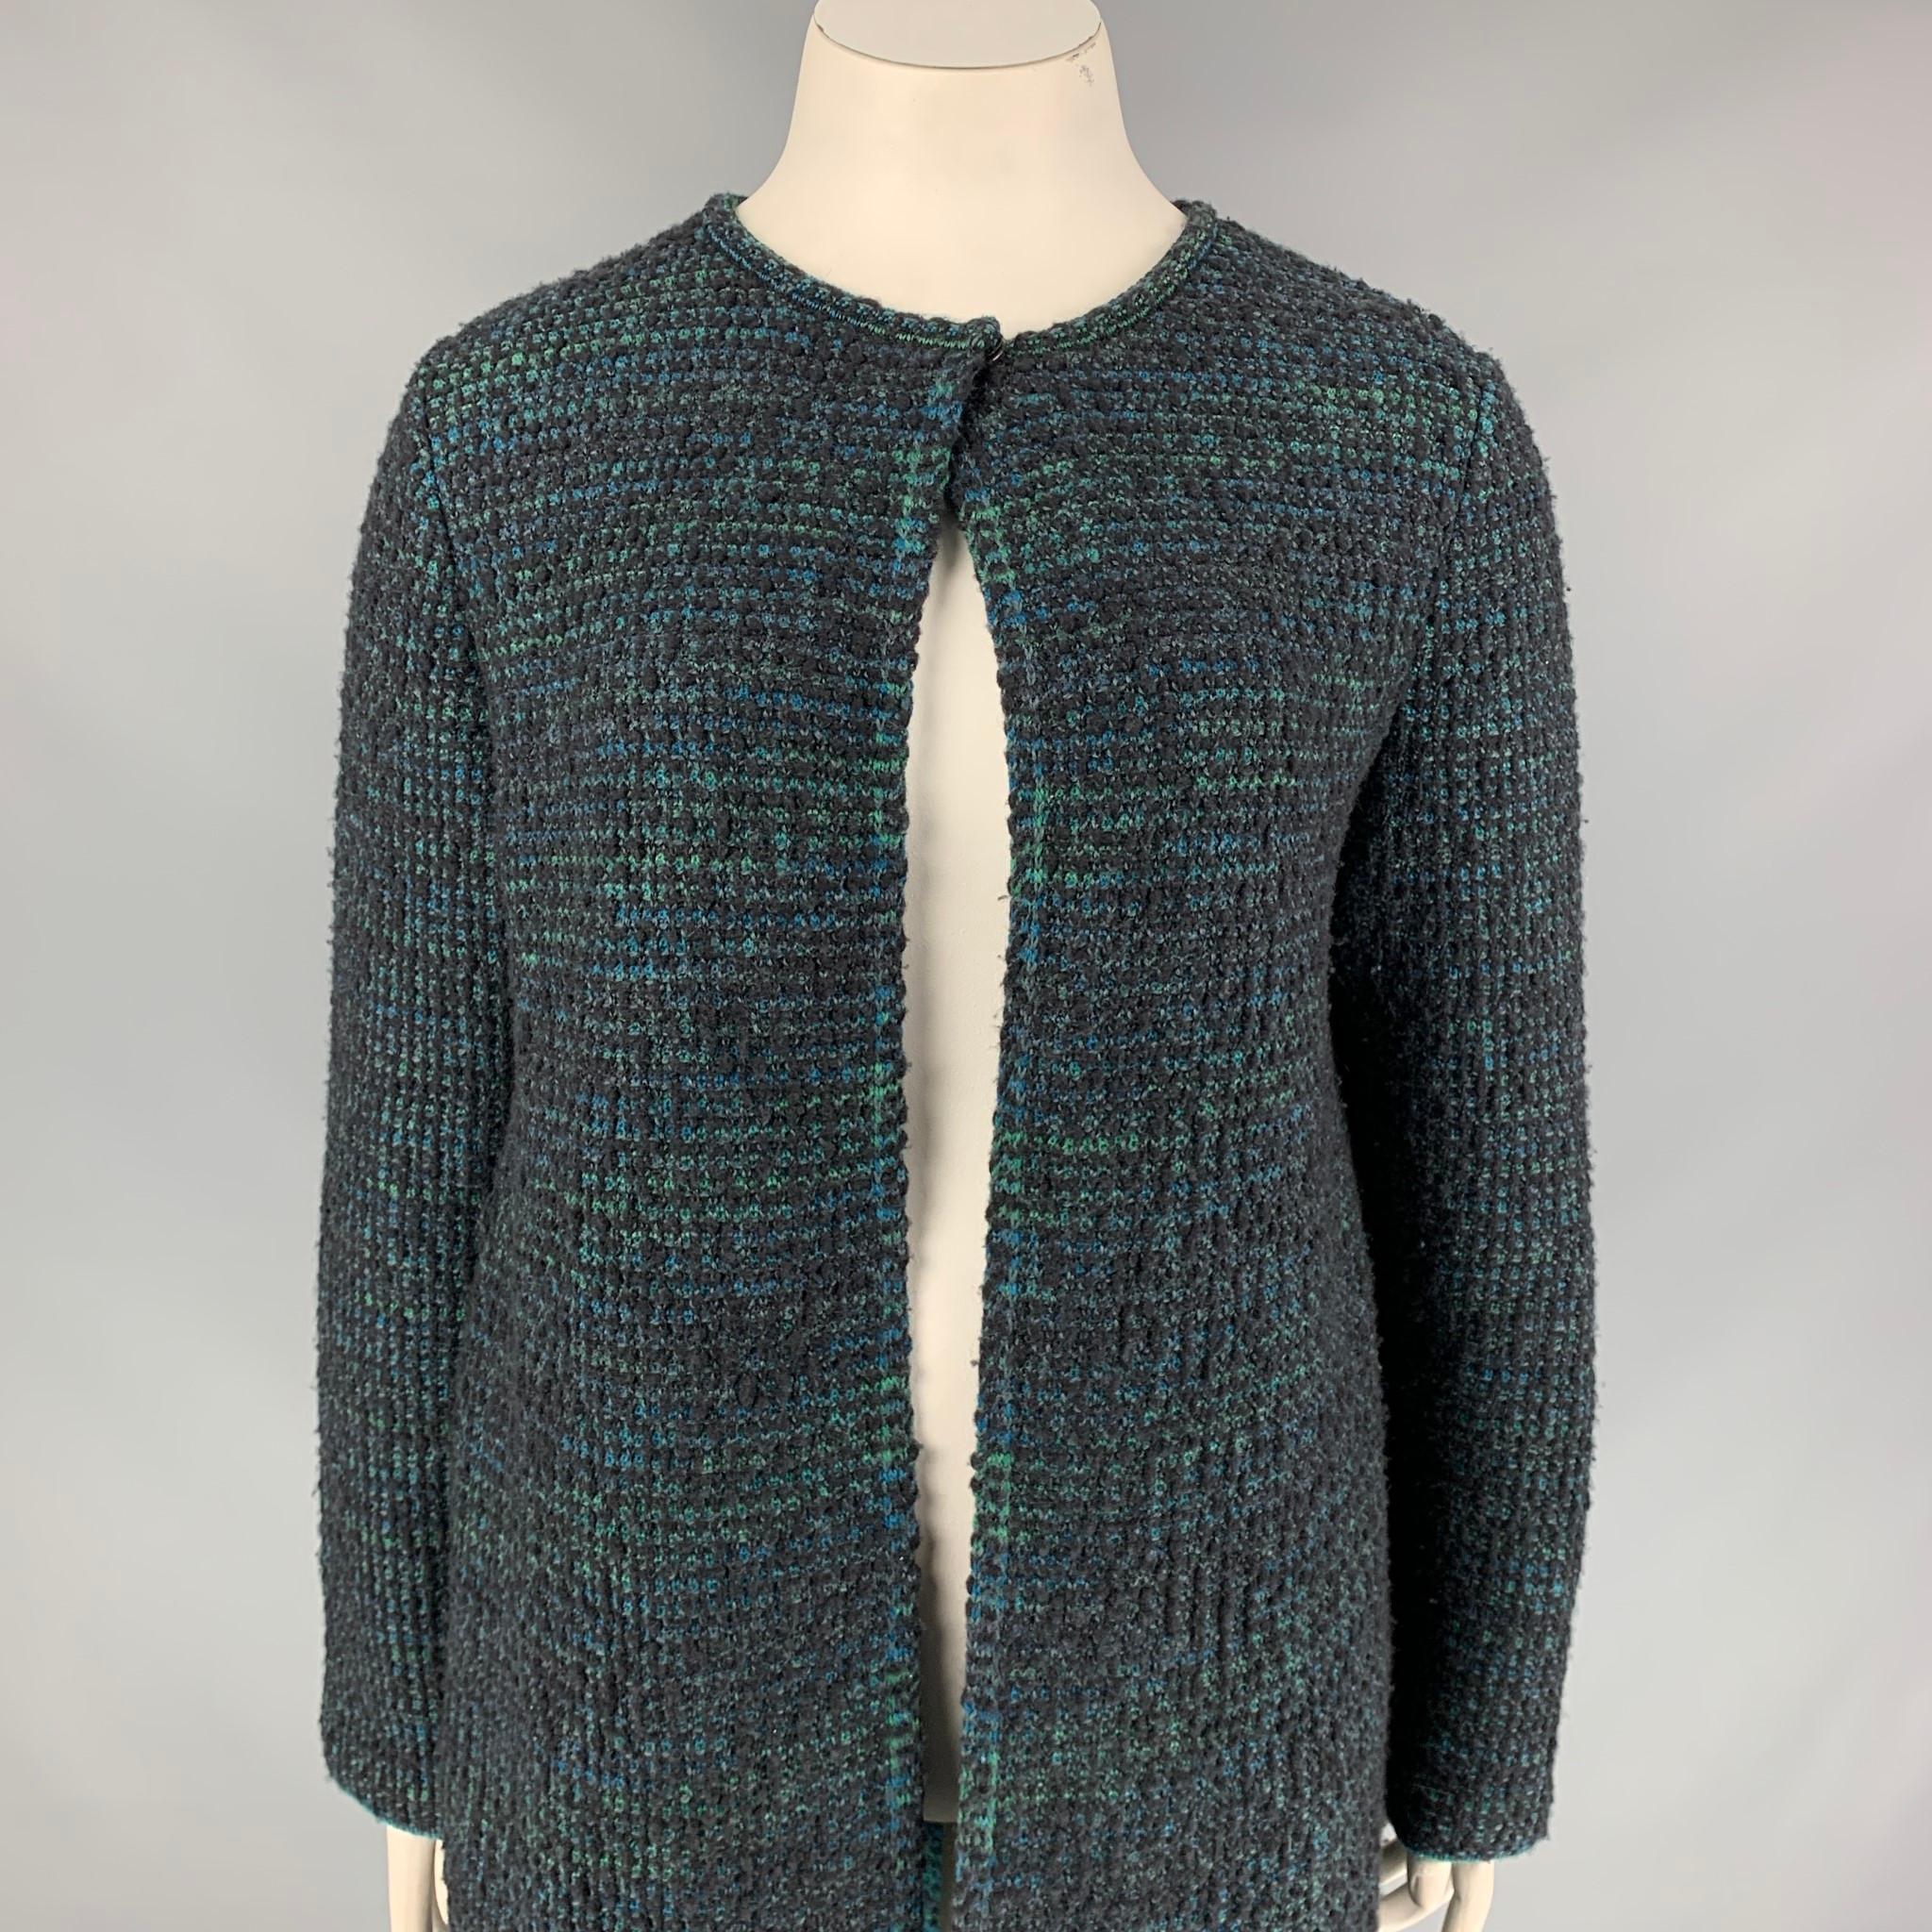 M MISSONI coat comes in a charcoal & green knitted wool featuring a single button closure detail and a open front. Made in Italy. 

Very Good Pre-Owned Condition.
Marked: 46
Original Retail Price: $925.00

Measurements:

Shoulder: 18 in.
Bust: 42